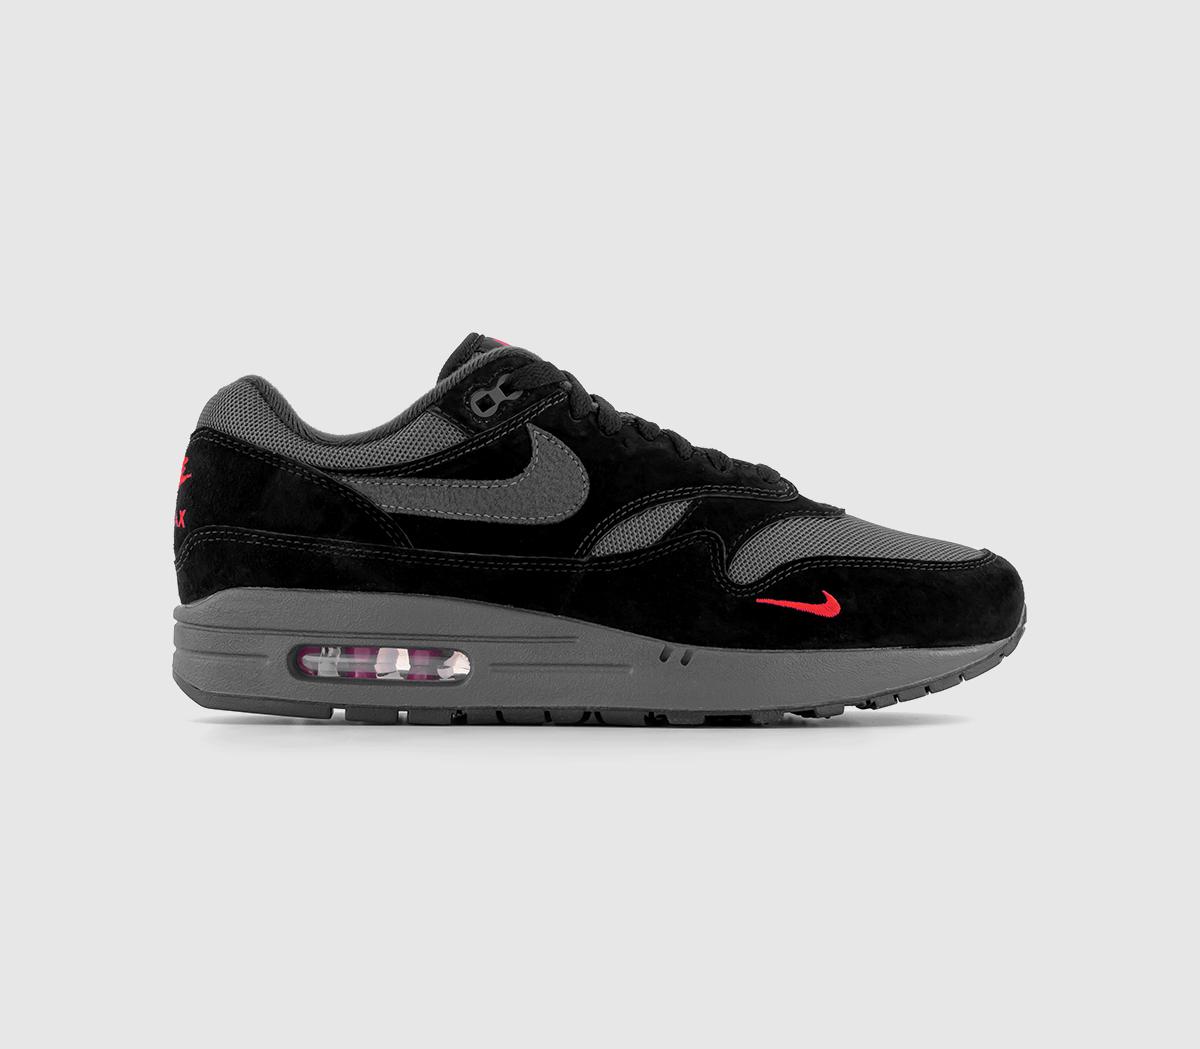 Nike Air Max 1 Trainers Black Anthracite University Red - Men's Trainers